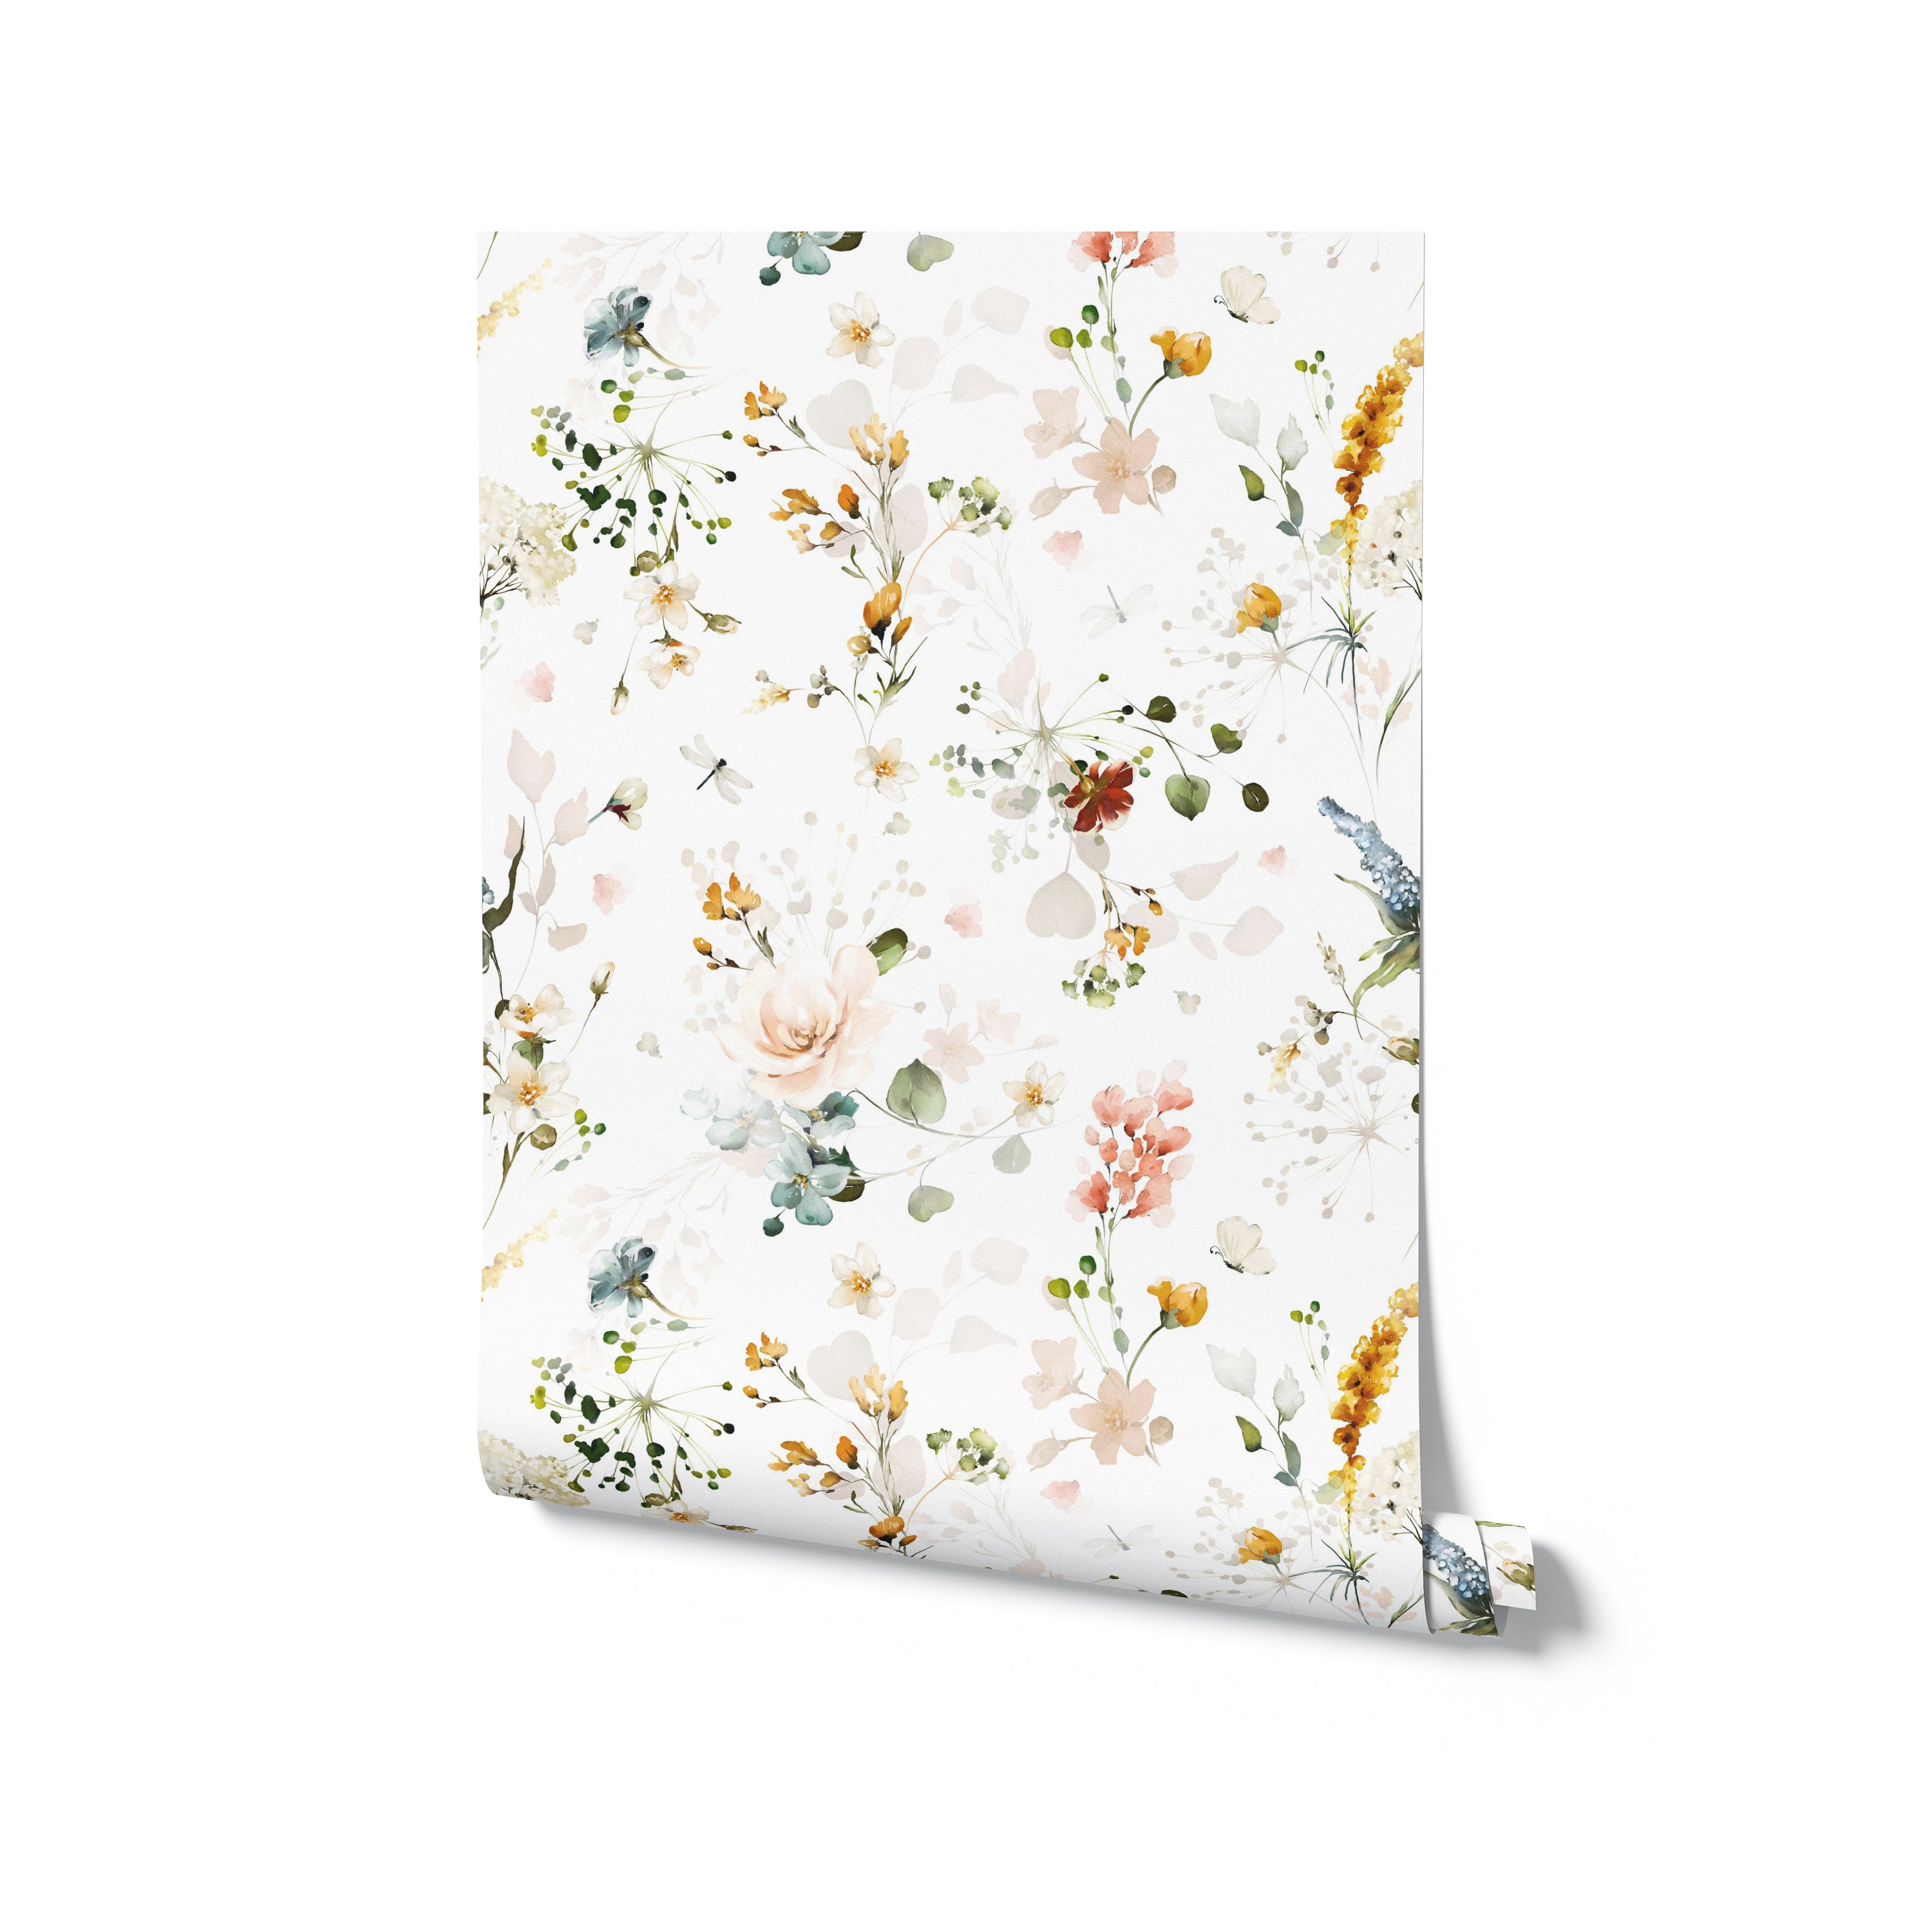 A sample of the Fiori Wallpaper rolled out, revealing the intricate watercolor flowers and foliage set against a clean white background, perfect for transforming any room into a blooming garden sanctuary